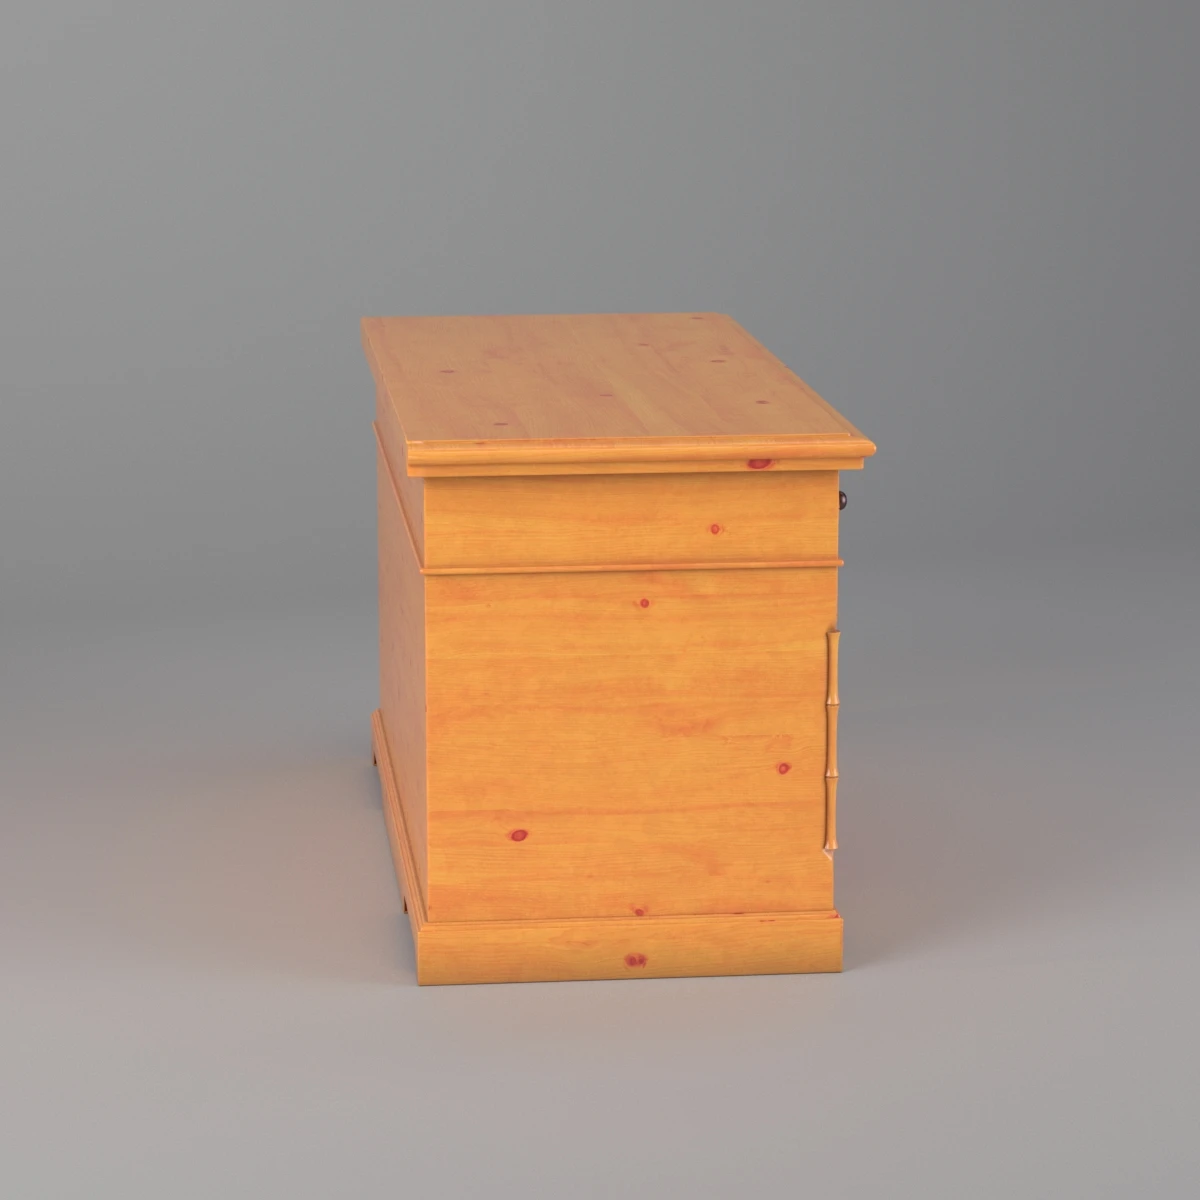 1920s Pine Faux Bamboo Painted Knee Hole Desk 3D Model_03